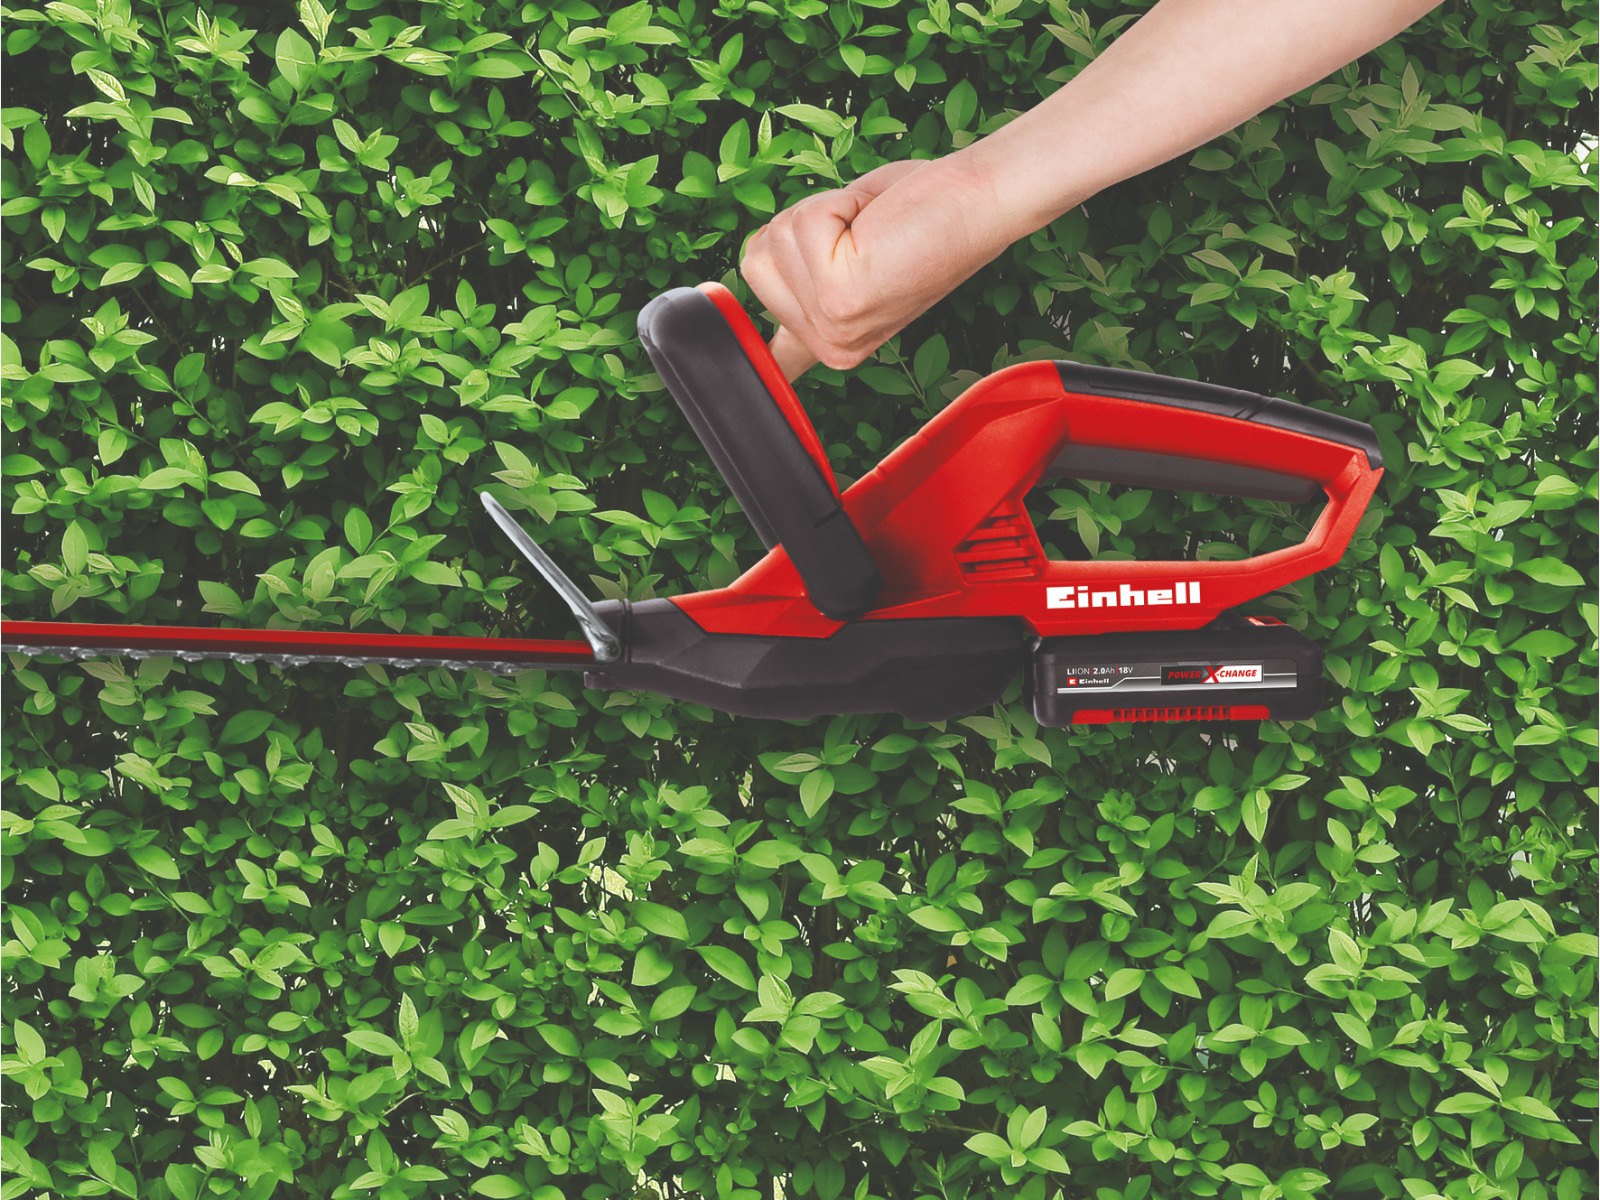 EINHELL 18V 20” Cordless Hedge Trimmer Kit (with 2.0 Ah battery & charger)